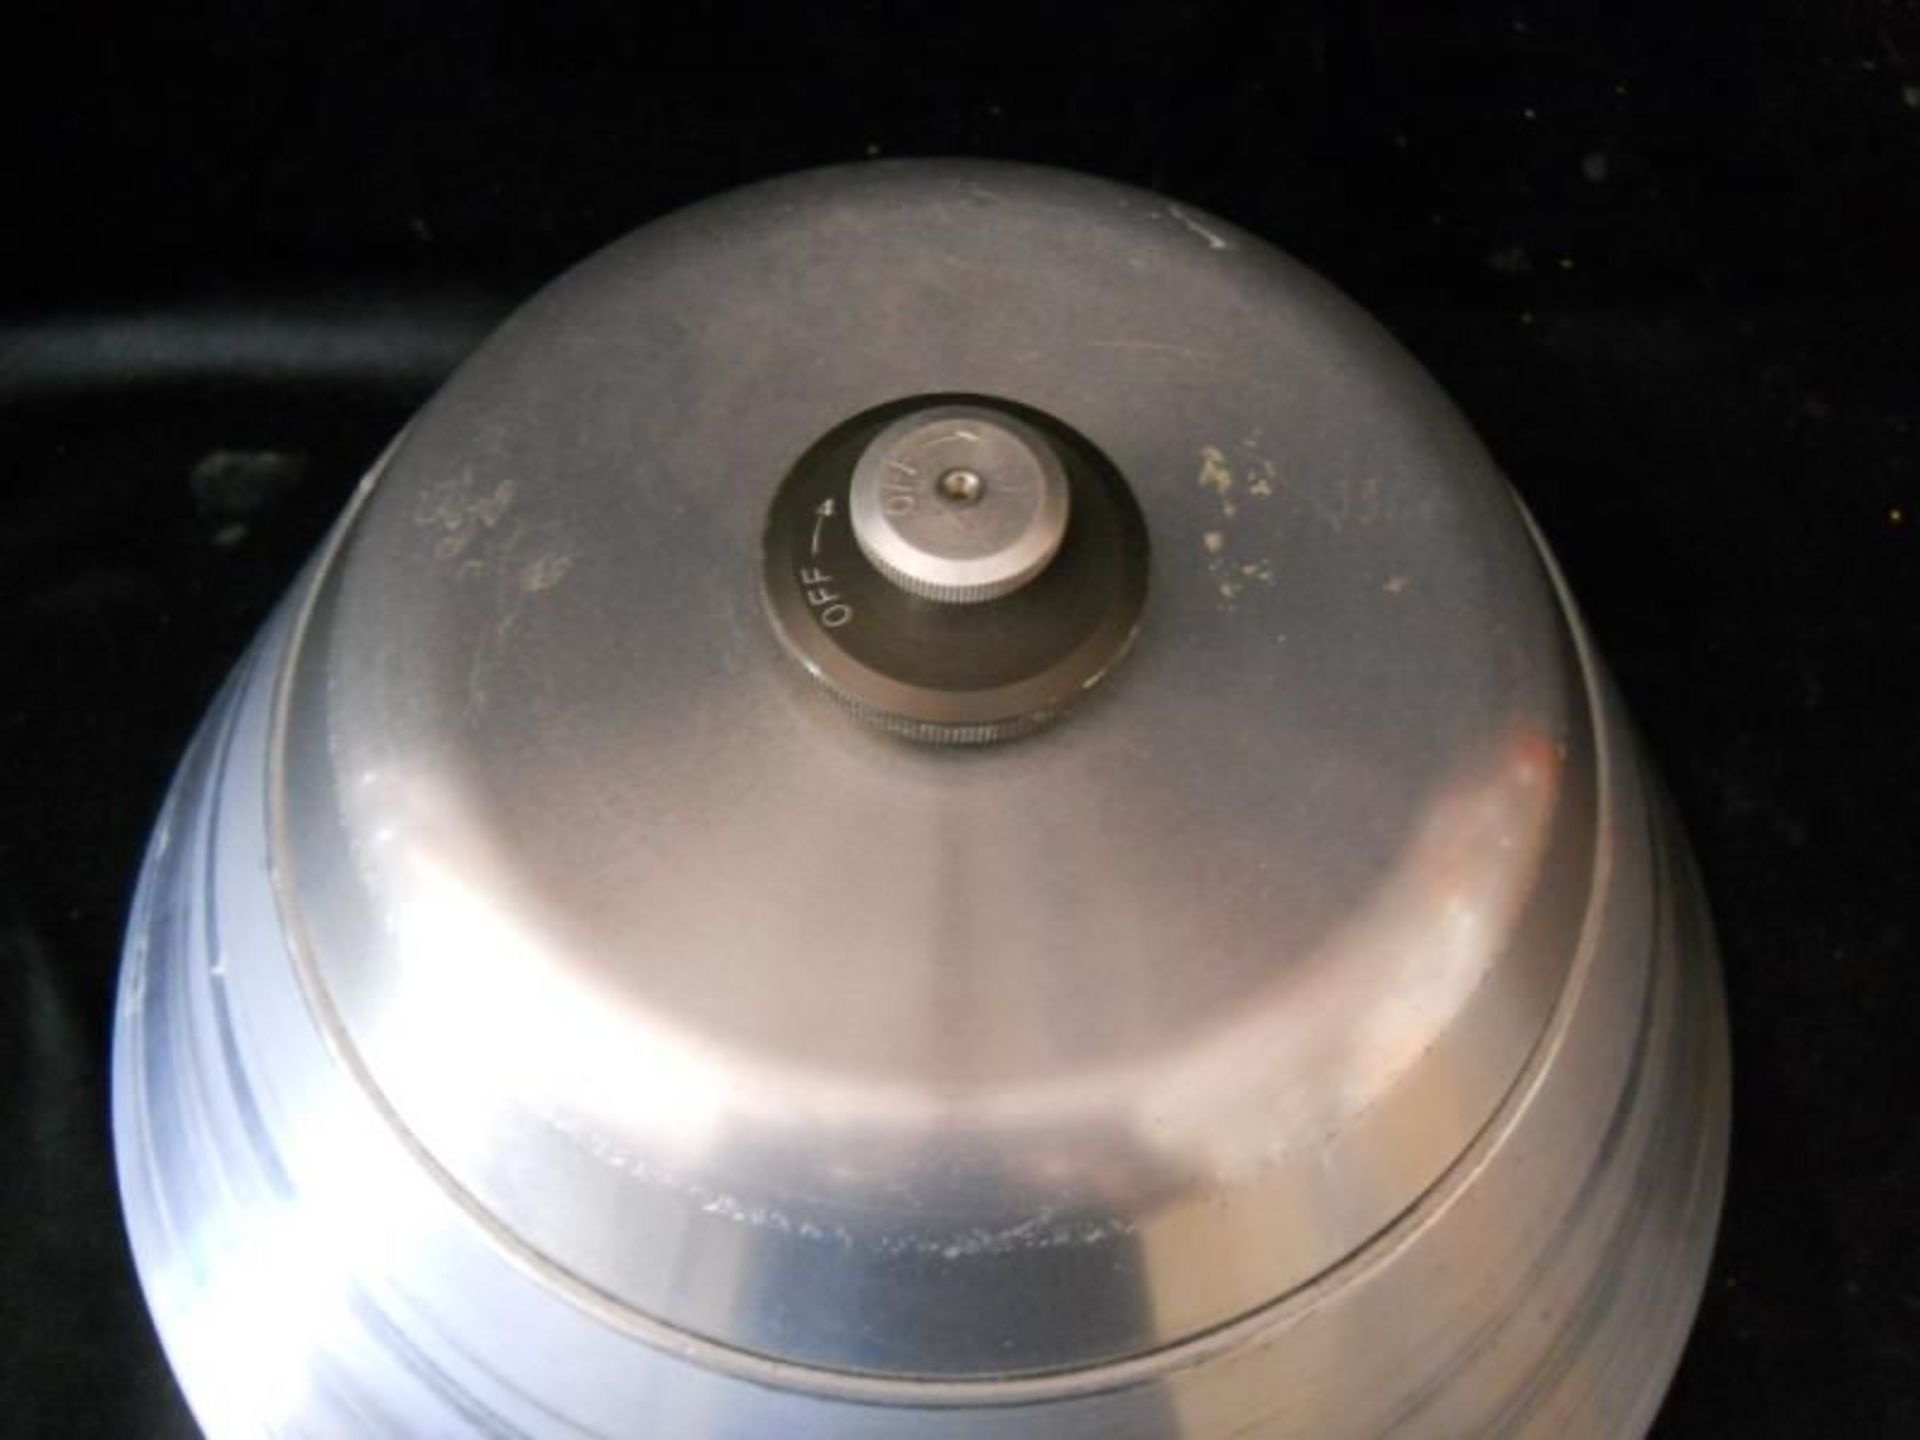 Sorvall Type GSA 13000 RPM Aluminum Centrifuge Rotor W / Cover, Qty 1, 321135793466 - Image 3 of 6